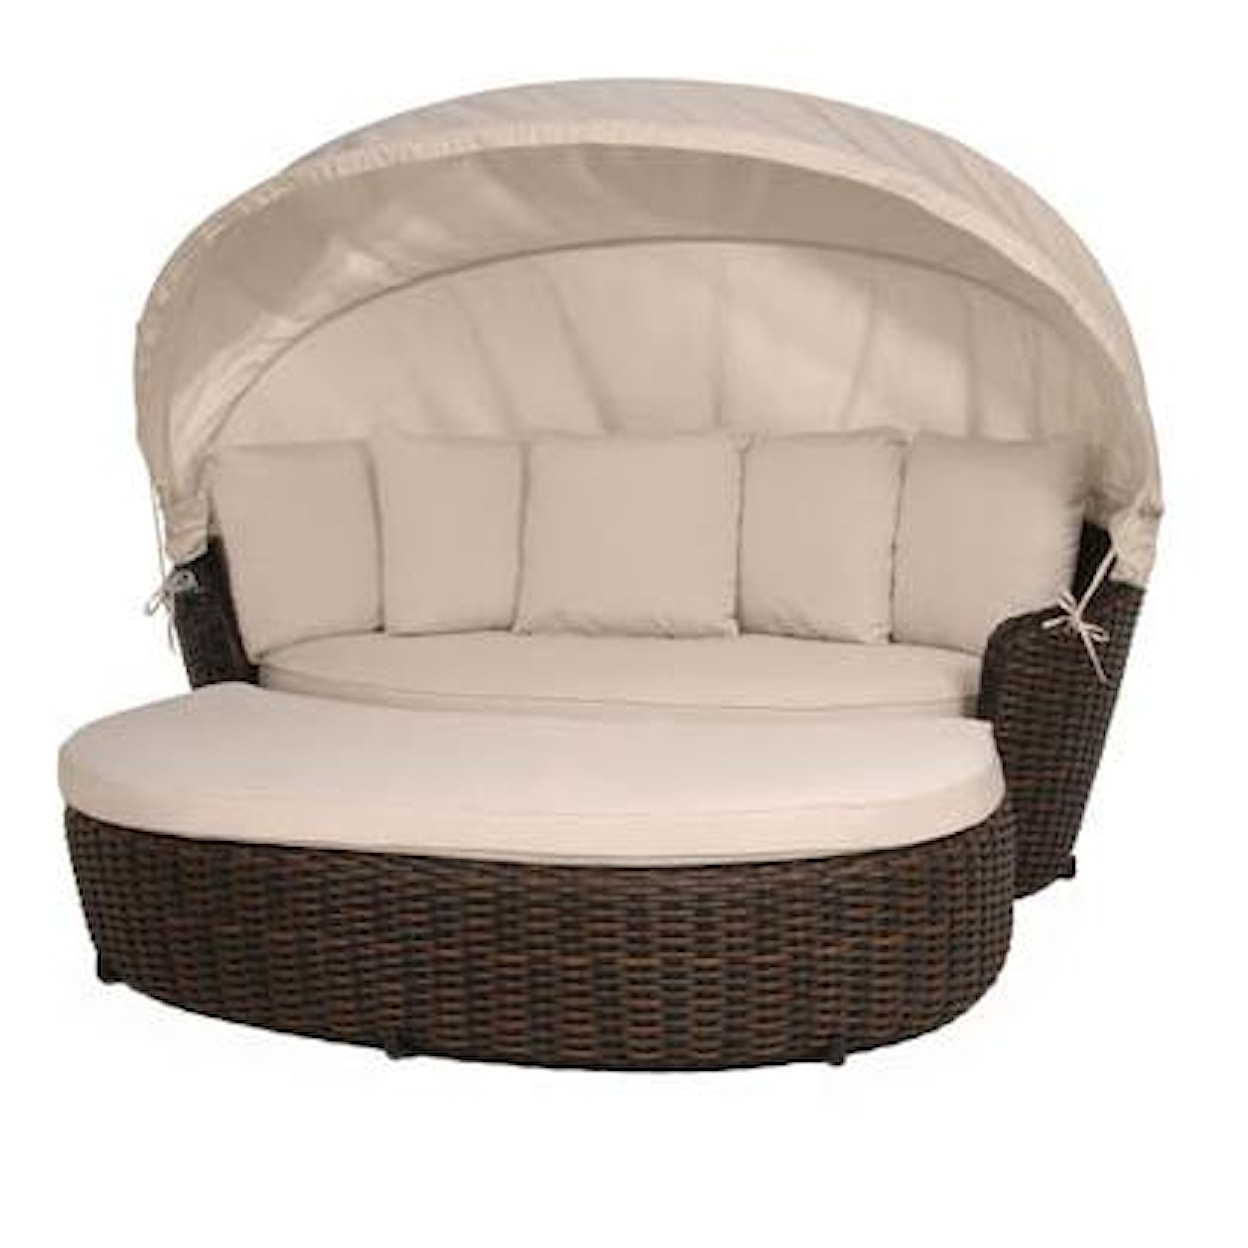 Ebel Dreux Daybed with Canopy and Ottoman Set